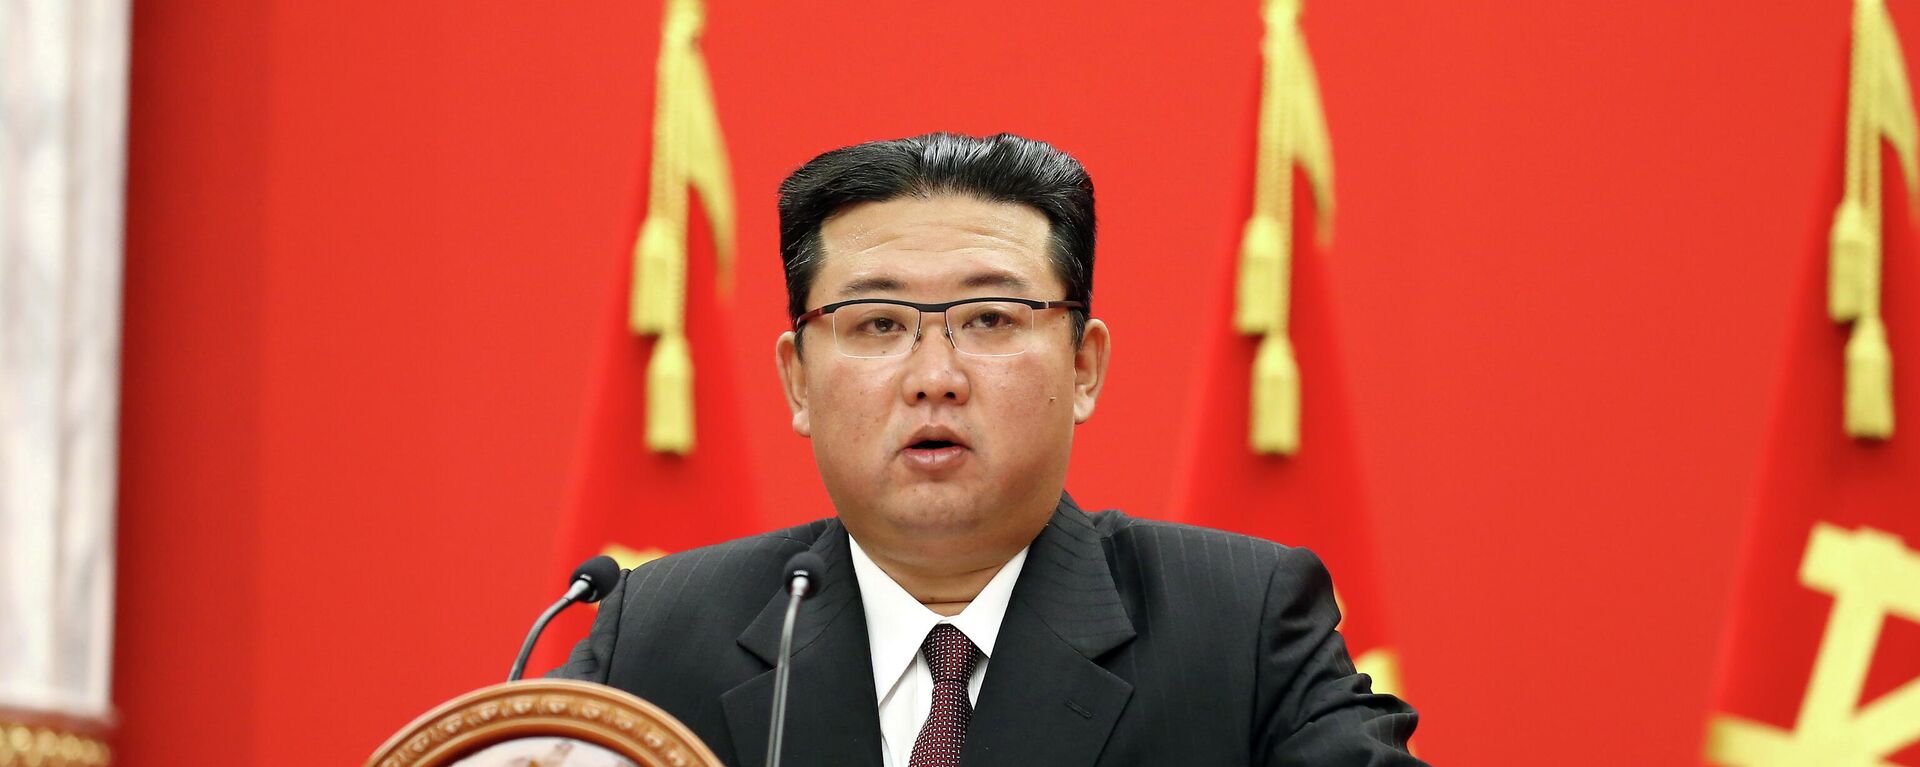 North Korean leader Kim Jong Un speaks during an event celebrating the 76th anniversary of the founding of the ruling Workers' Party of Korea (WPK) in Pyongyang, North Korea, in this undated photo released on October 11, 2021 by North Korea's Korean Central News Agency (KCNA).  - Sputnik International, 1920, 29.10.2021